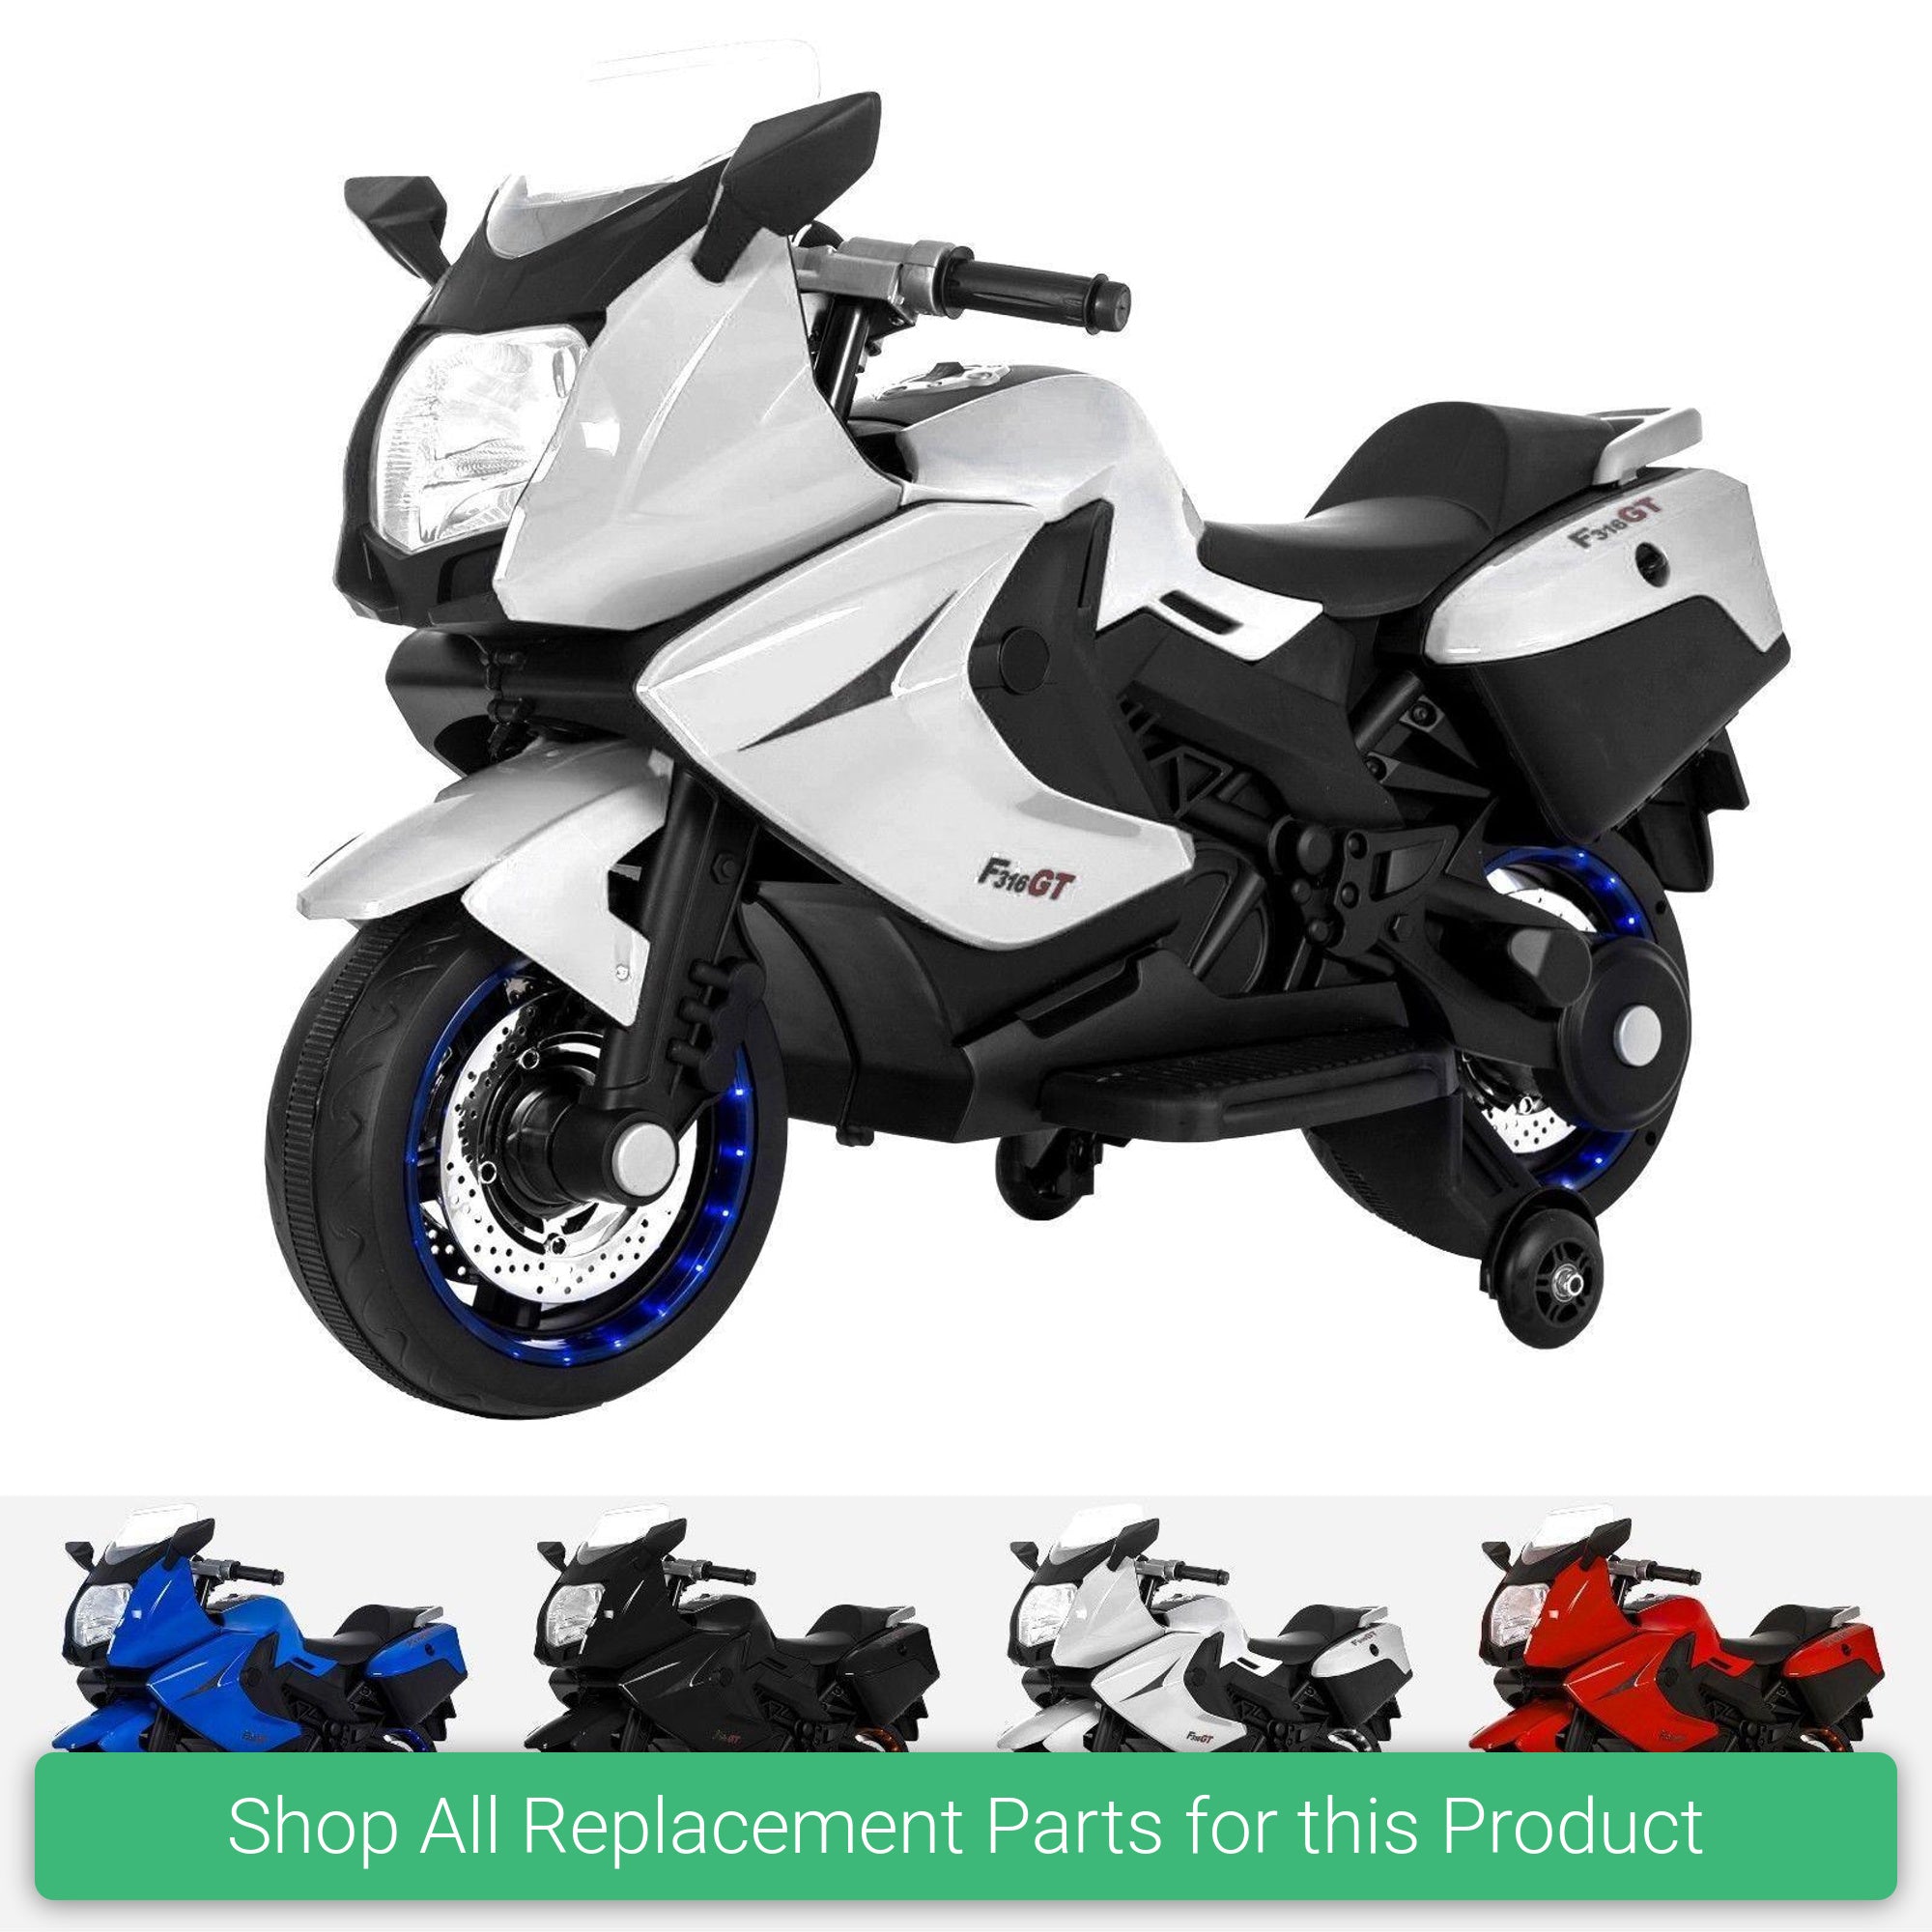 Replacement Parts and Spares for Kids BMW K1600 GT STyle - BMW-K1600-2019 - XMX-316